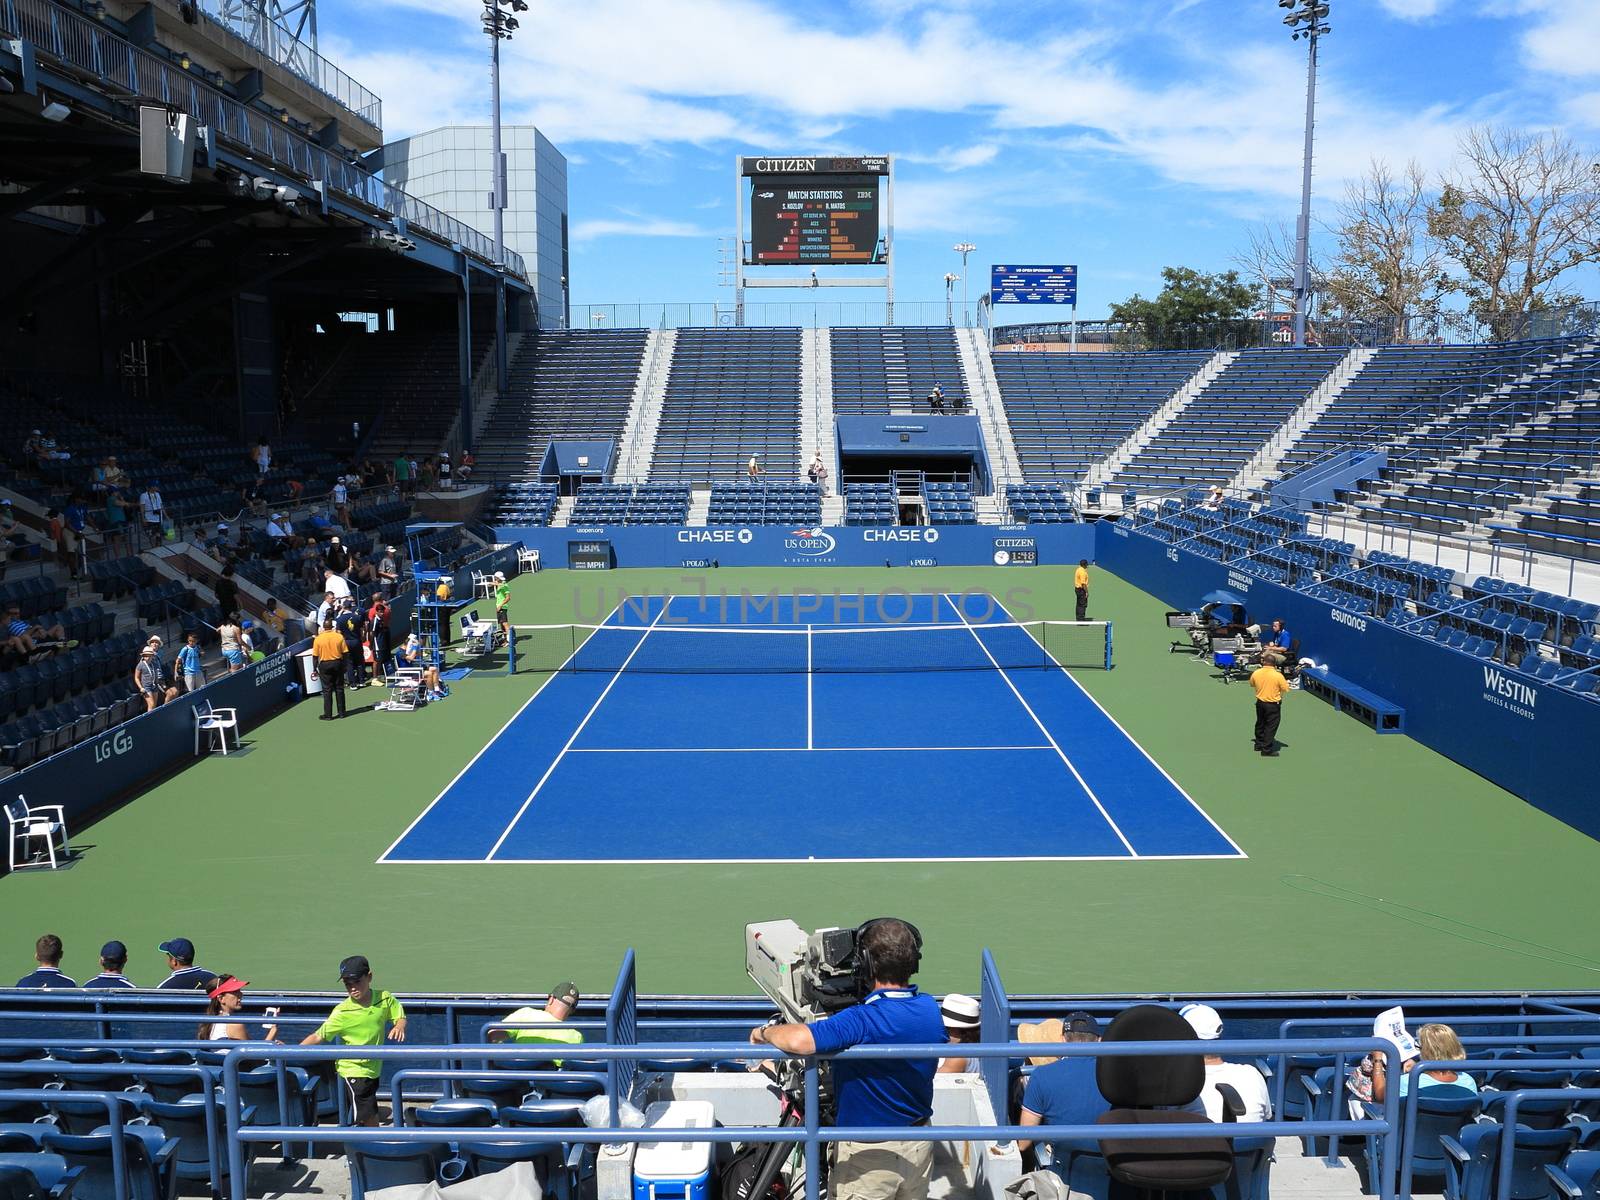 Famous 6,000 seat US Open Grandstand Court at the Billie Jean King Tennis Center.